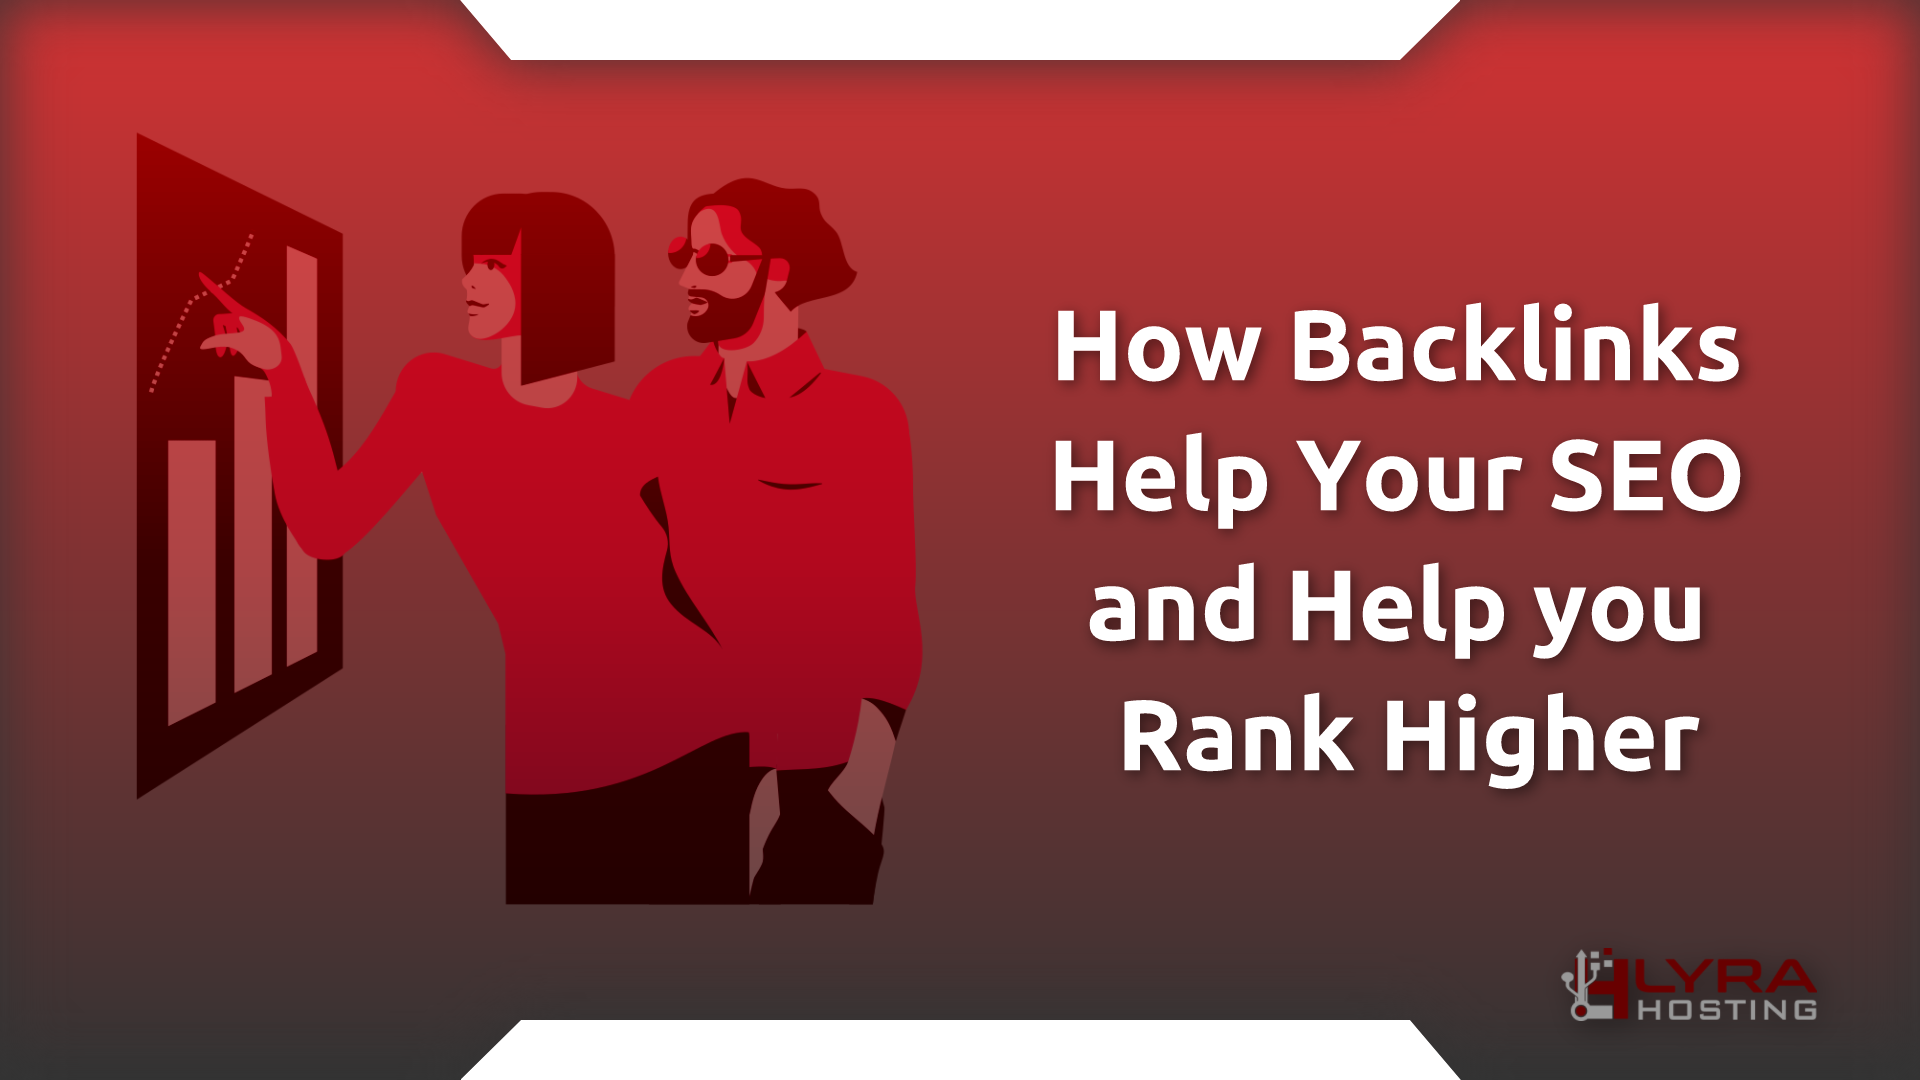 How Backlinks Help Your SEO and Help you Rank Higher